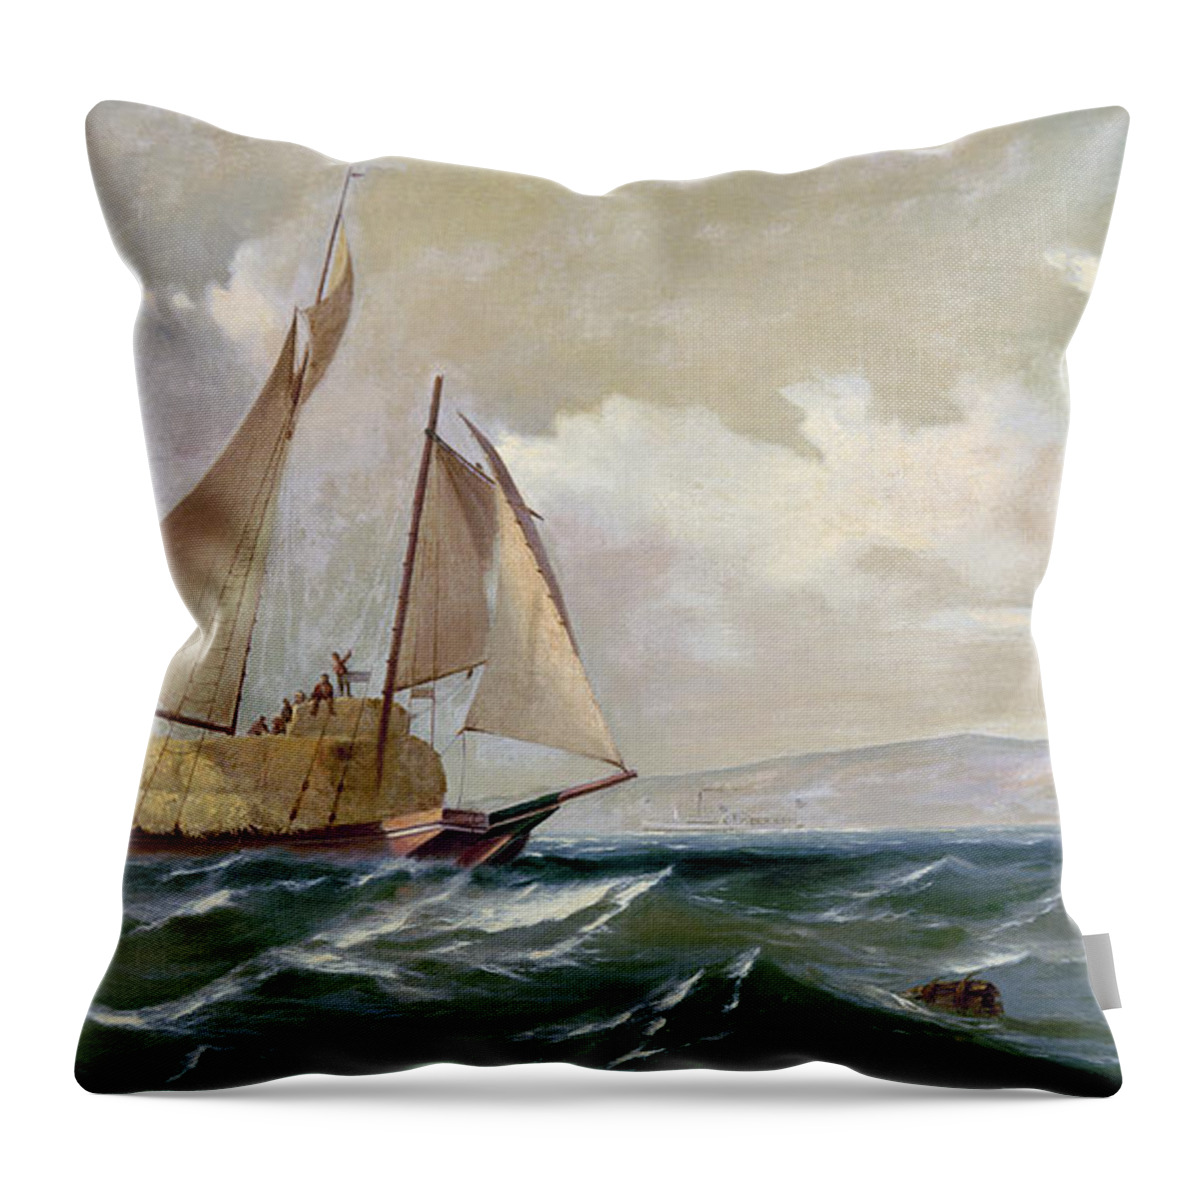 1871 Throw Pillow featuring the photograph Denny: Hay Schooner, 1871 by Granger